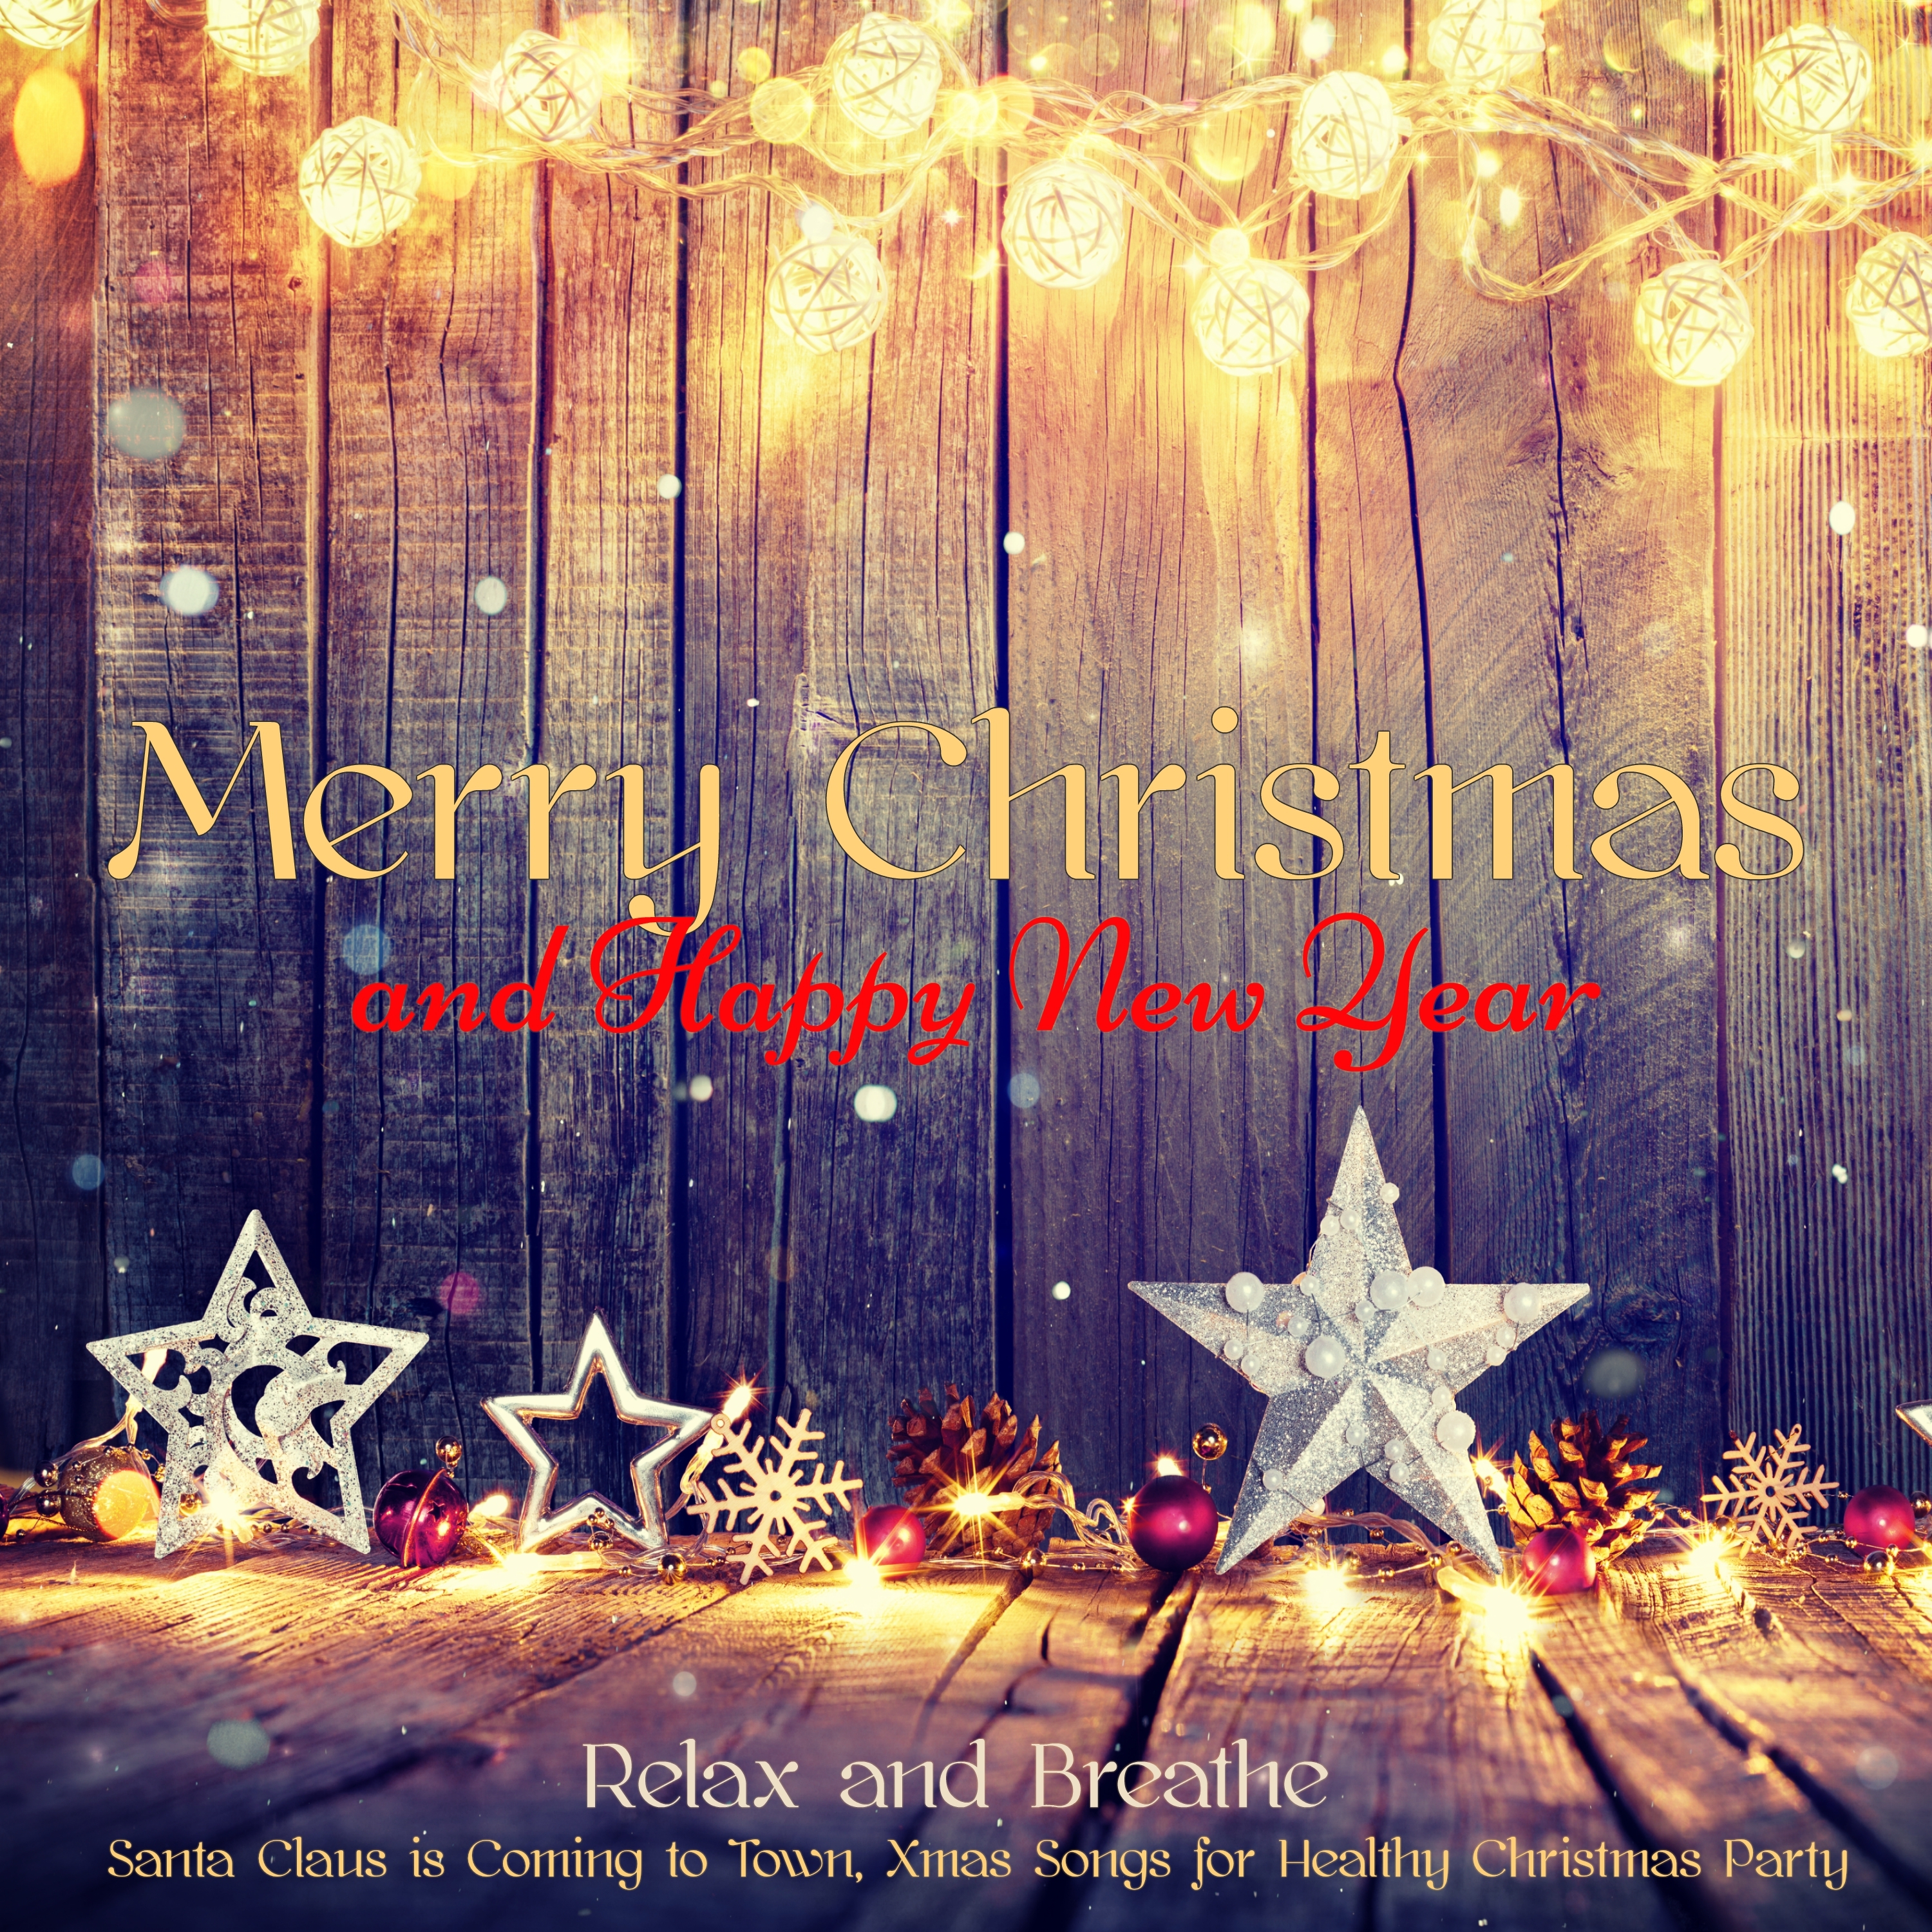 Merry Christmas and Happy New Year  Relax and Breathe, Santa Claus is Coming to Town, Xmas Songs for Healthy Christmas Party